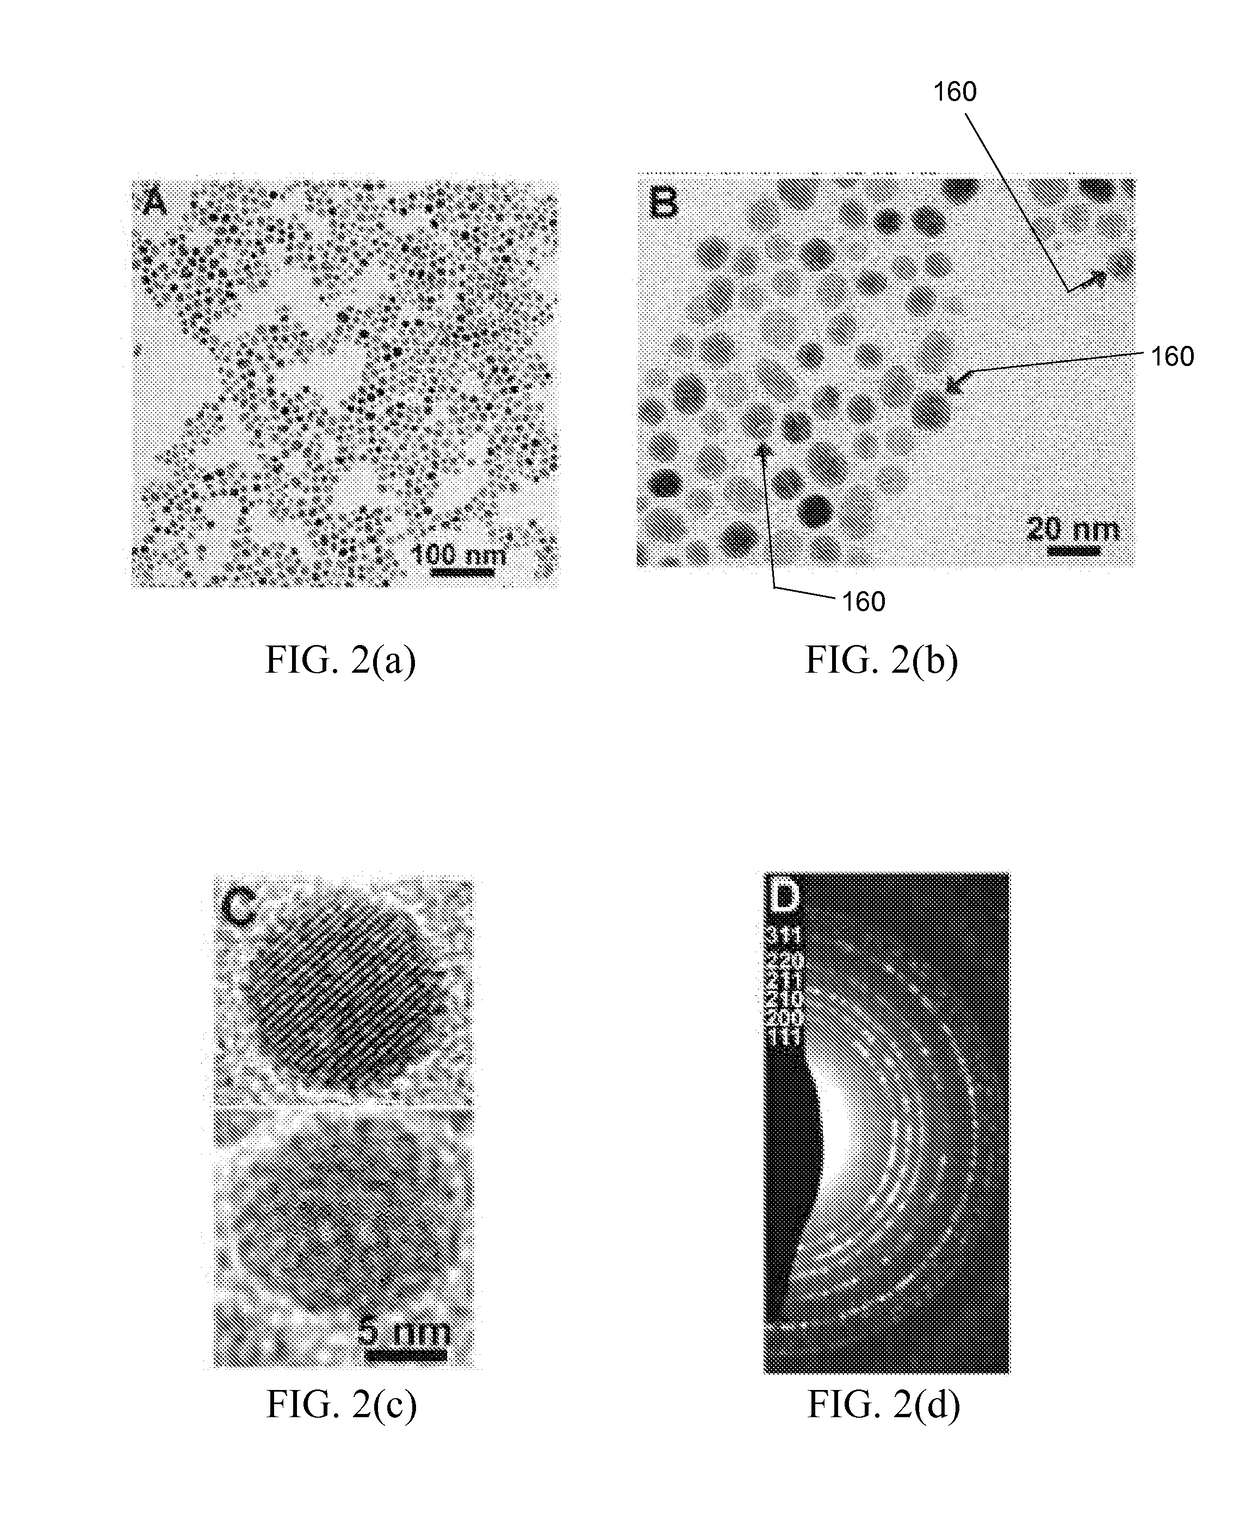 Method to synthesize colloidal iron pyrite (FeS<sub>2</sub>) nanocrystals and fabricate iron pyrite thin film solar cells